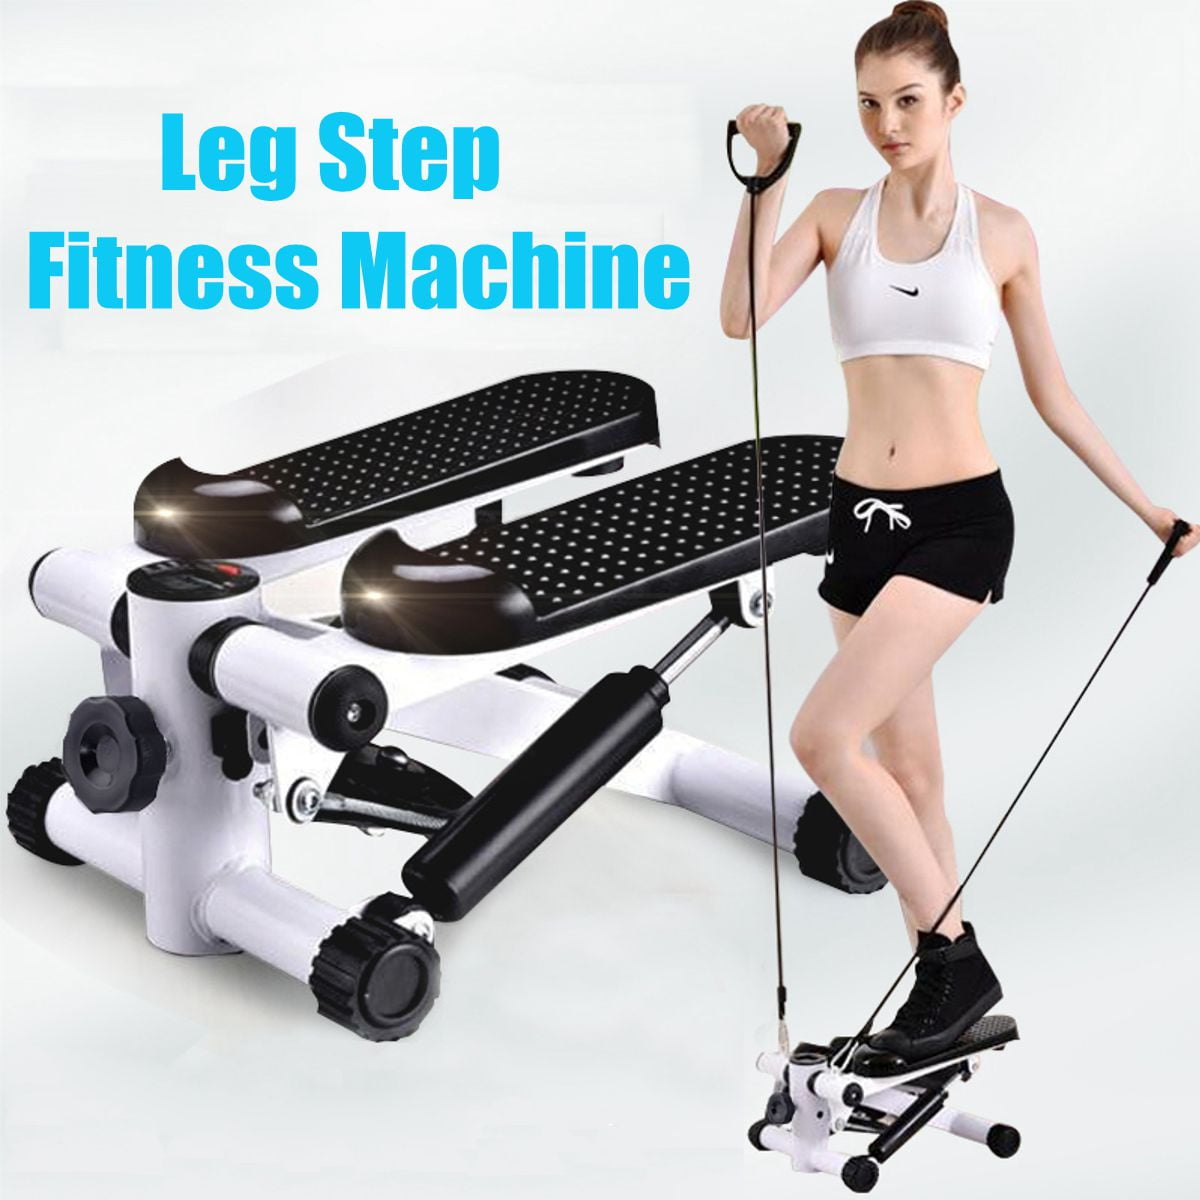 Step Machines Indoor Fitness Stair Stepper Adjustable Mini Fitness Stepper Exercise Machine Cardio Exercise Trainer Twisting Action With Resistance Bands For Full-Body Workout Stepper Exercises Equipm